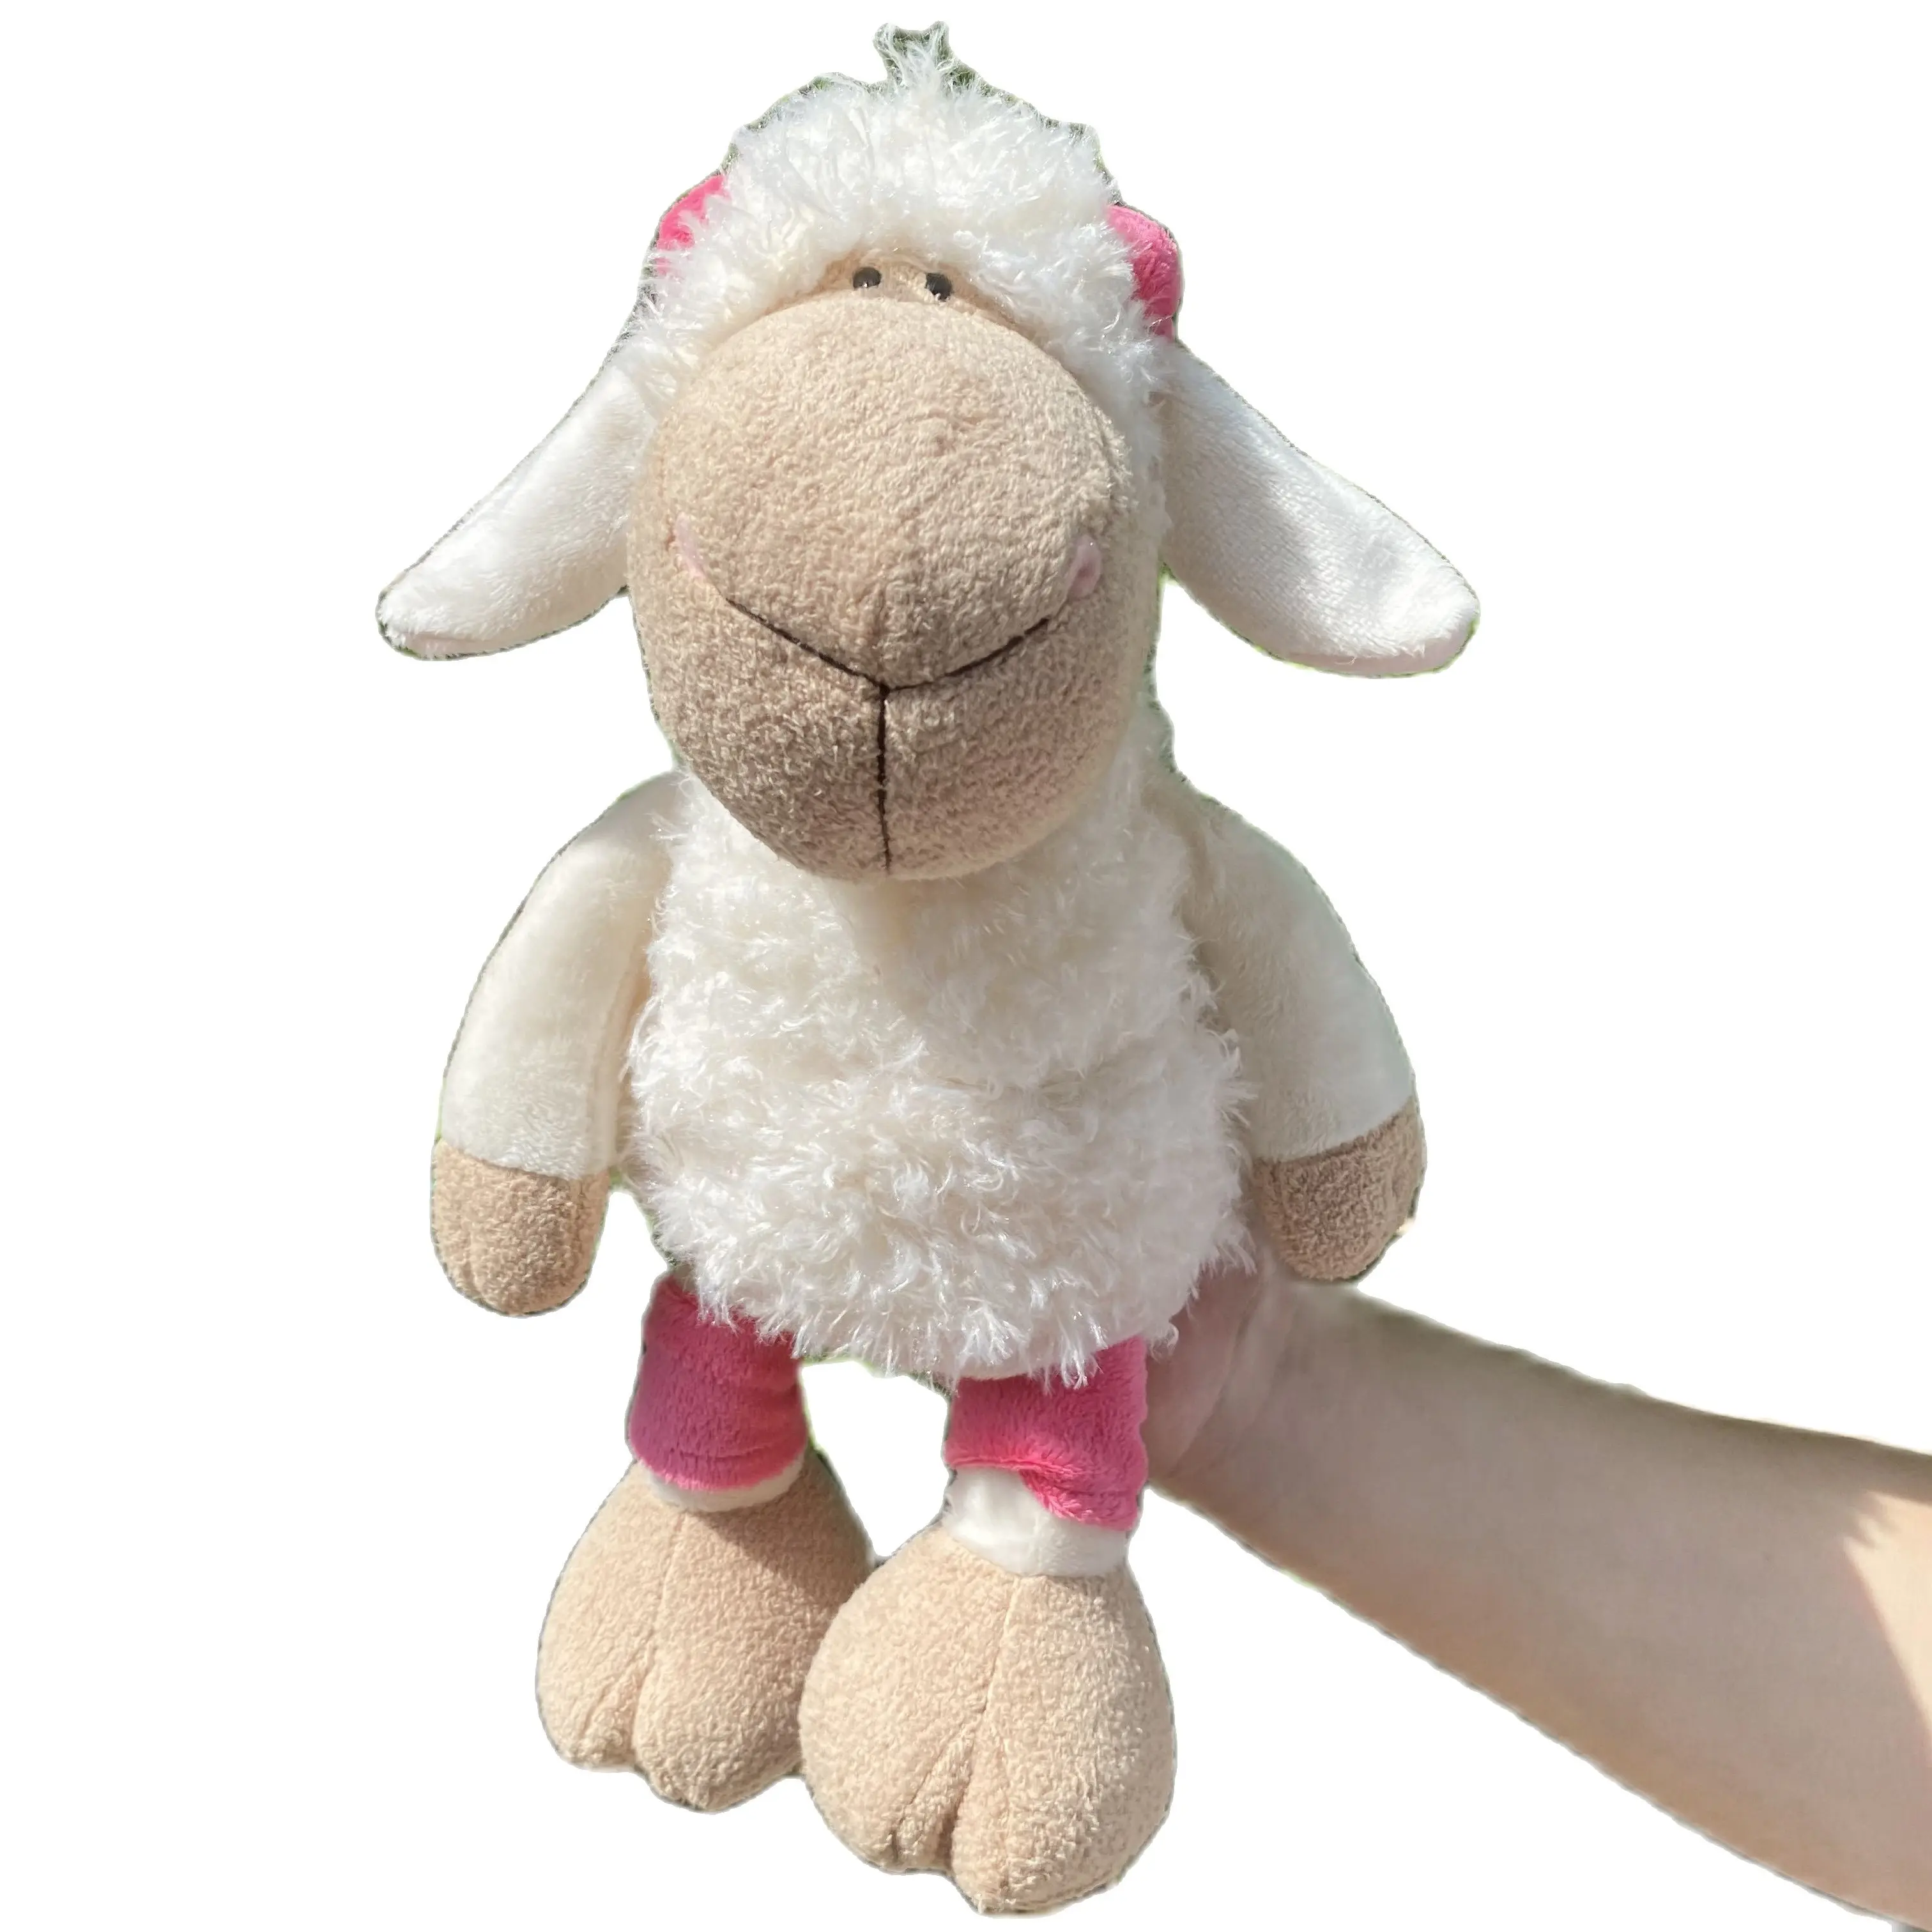 35-50cm Lucy Cute Design Sheep Plush Toys Jolly Little Lamb Stuffed Animal Toy Dolls In Wolf's Clothing For Children Gift